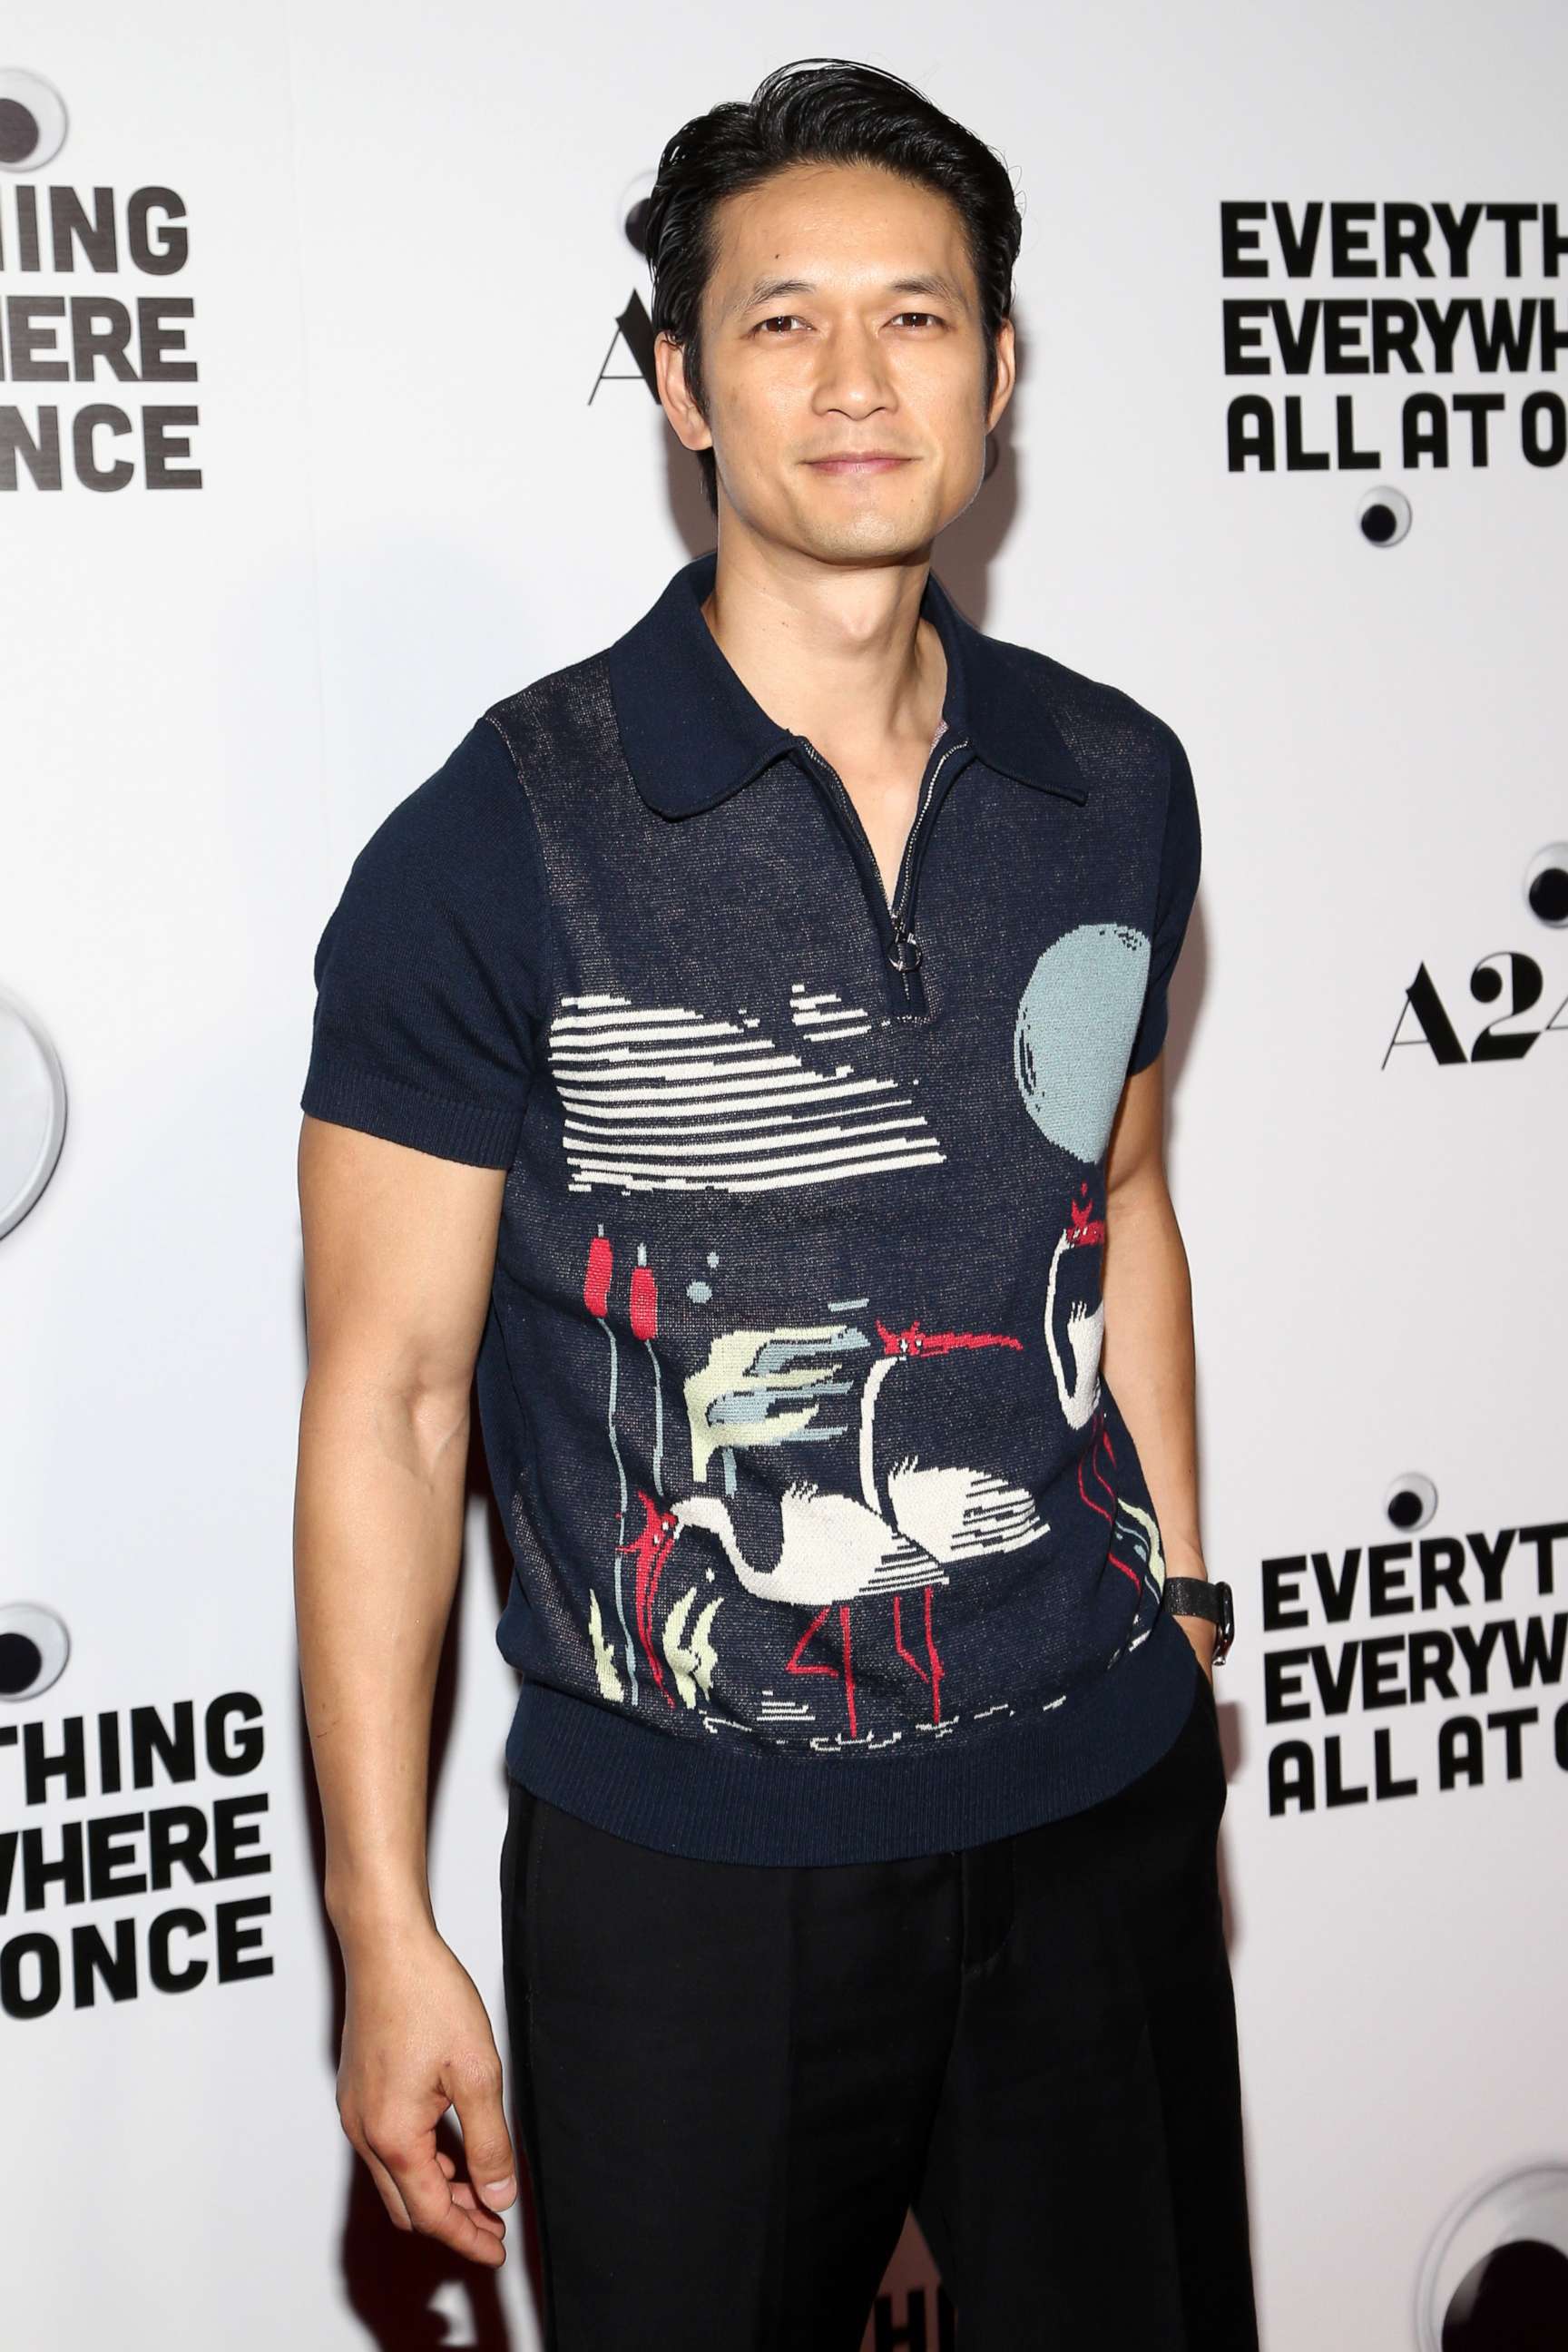 PHOTO: Harry Shum Jr. at The Theatre at Ace Hotel on March 23, 2022 in Los Angeles.